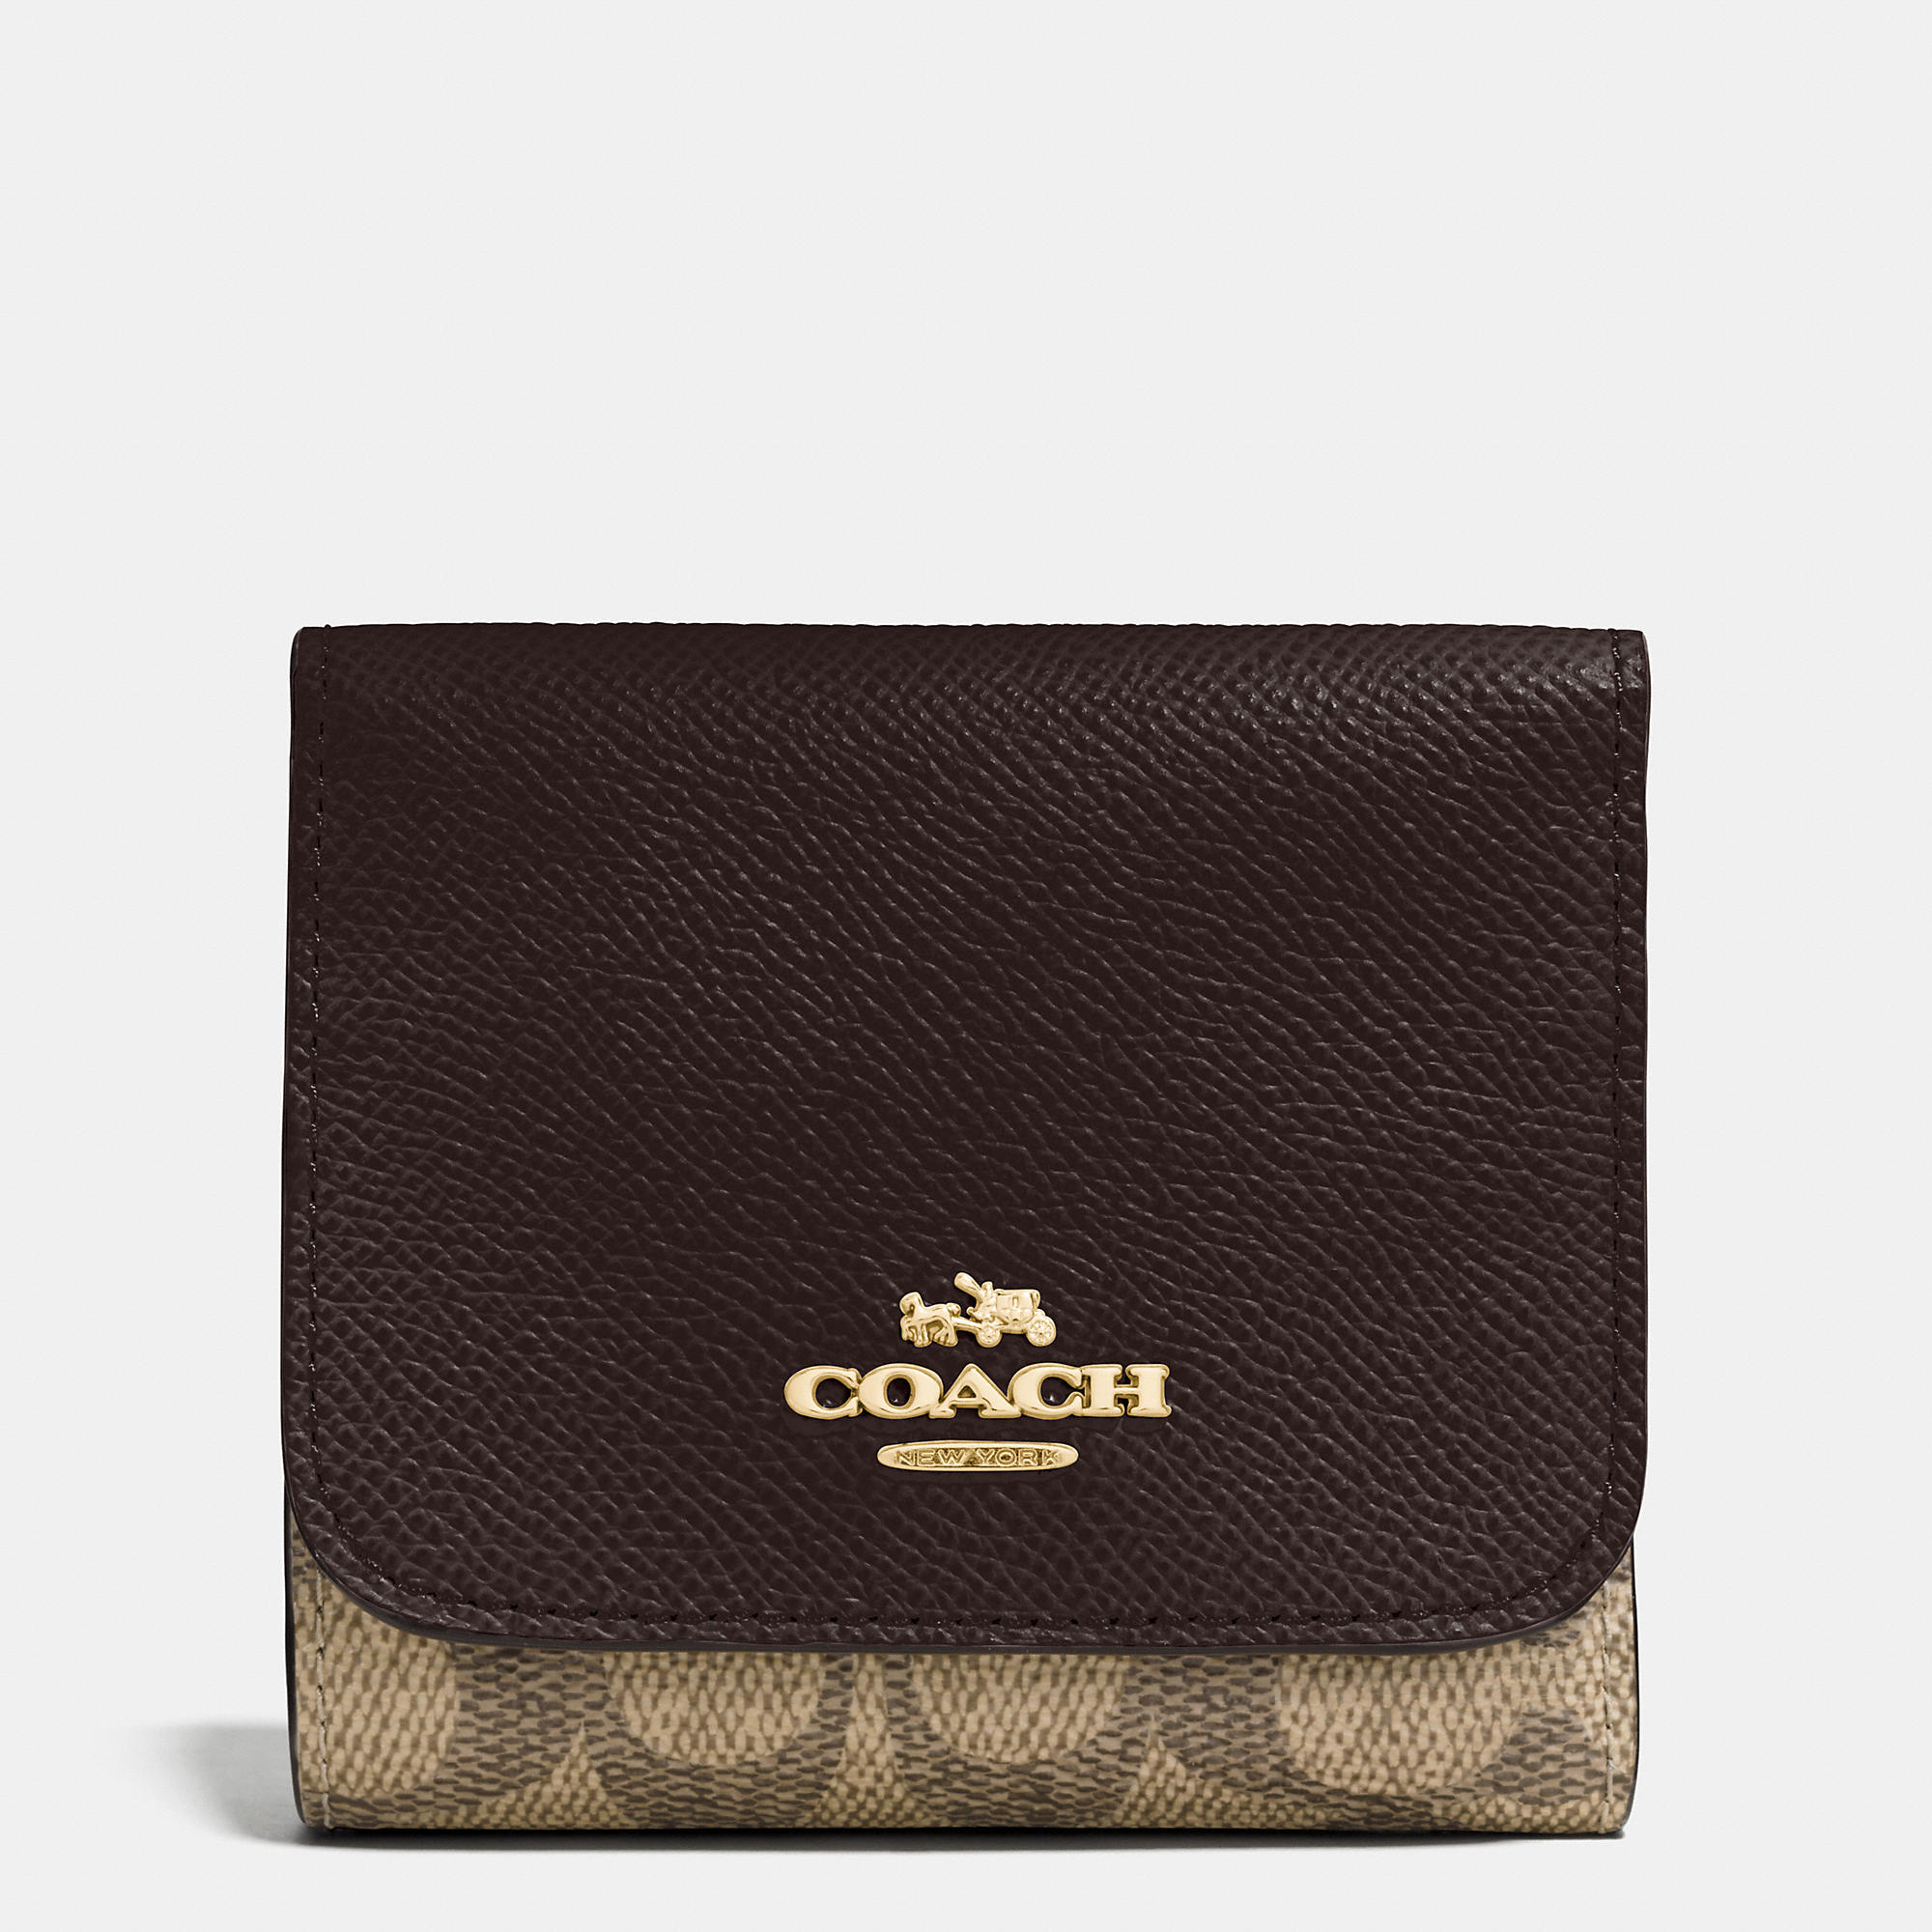 Coach Small Wallet In Colorblock Signature Coated Canvas in Metallic | Lyst